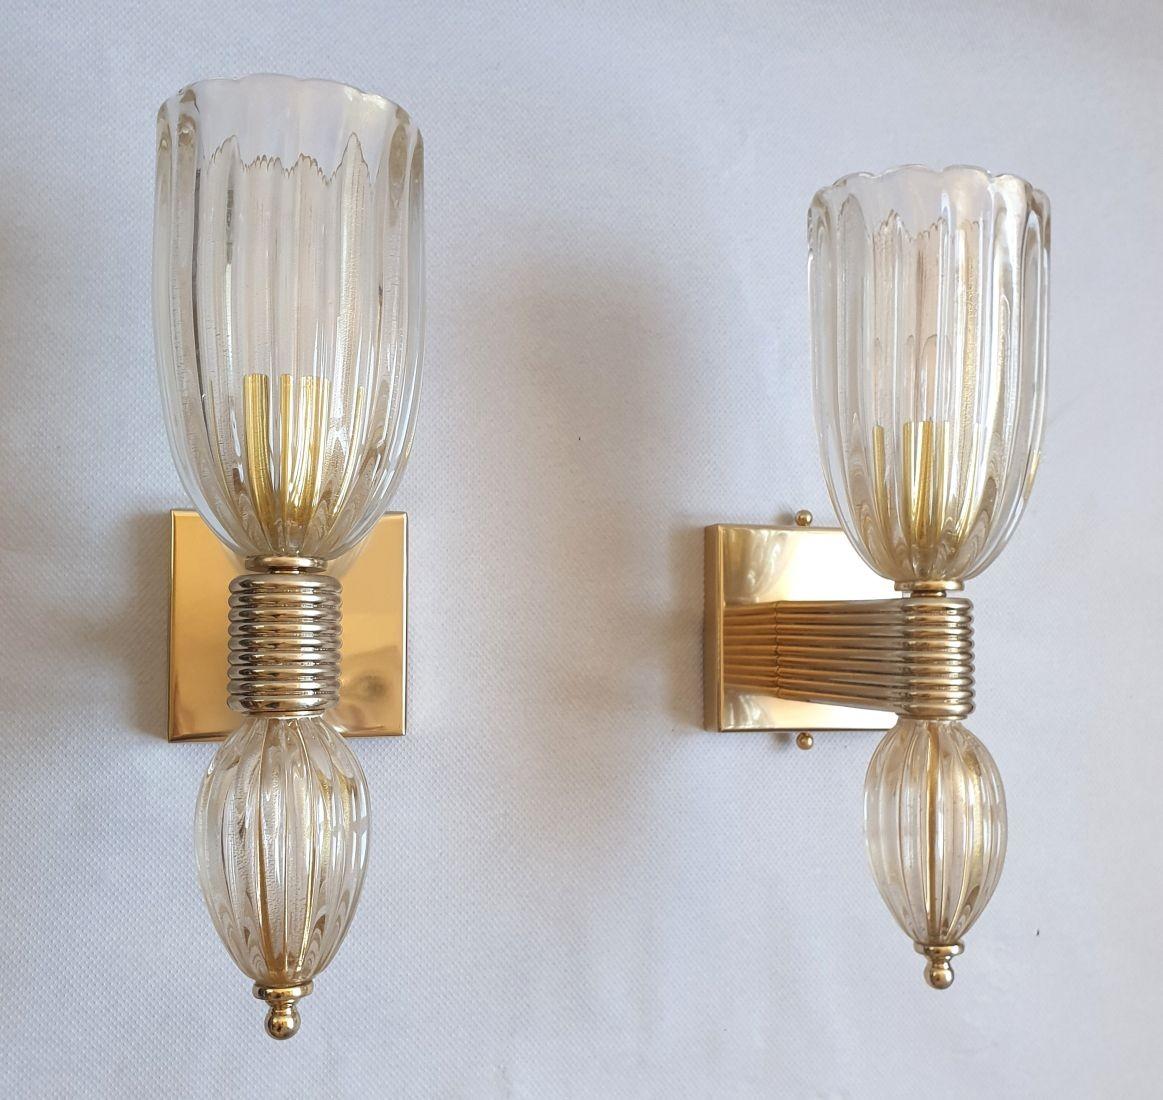 Pair of Mid-Century Modern Murano glass and brass sconces, Italy, attributed to Barovier and Toso, circa 1960.
The antique sconces are made of hand-blown Murano glass, clear with gold flakes, with a beautiful and quality thickness, making the glass